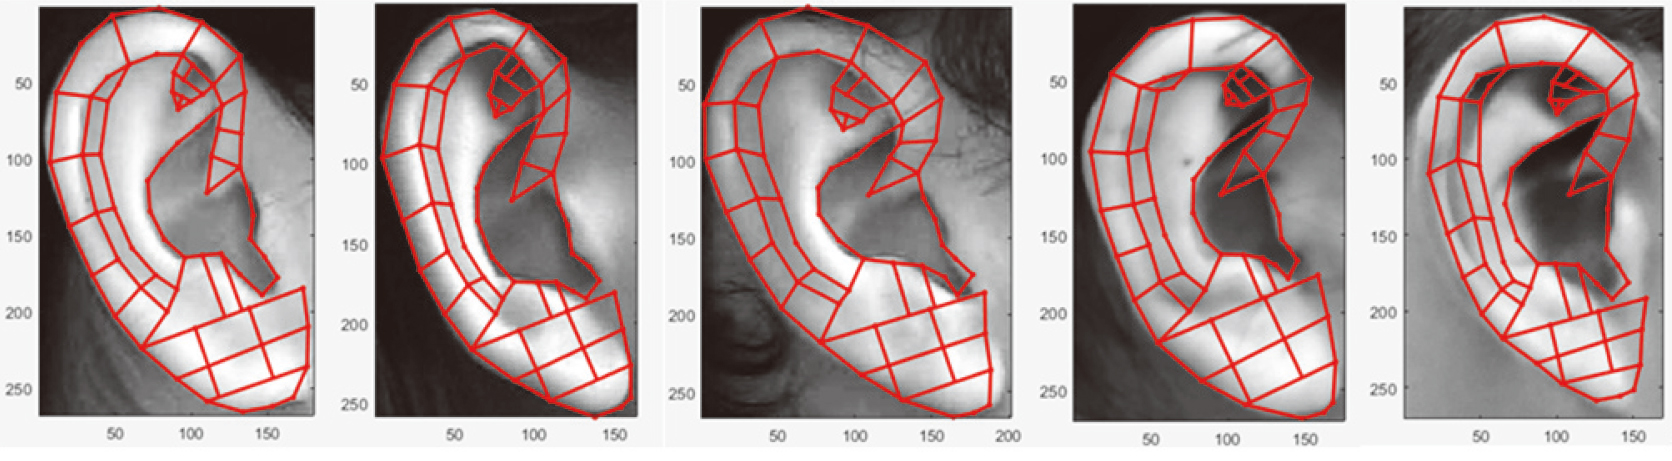 Some auricular division results of test images.